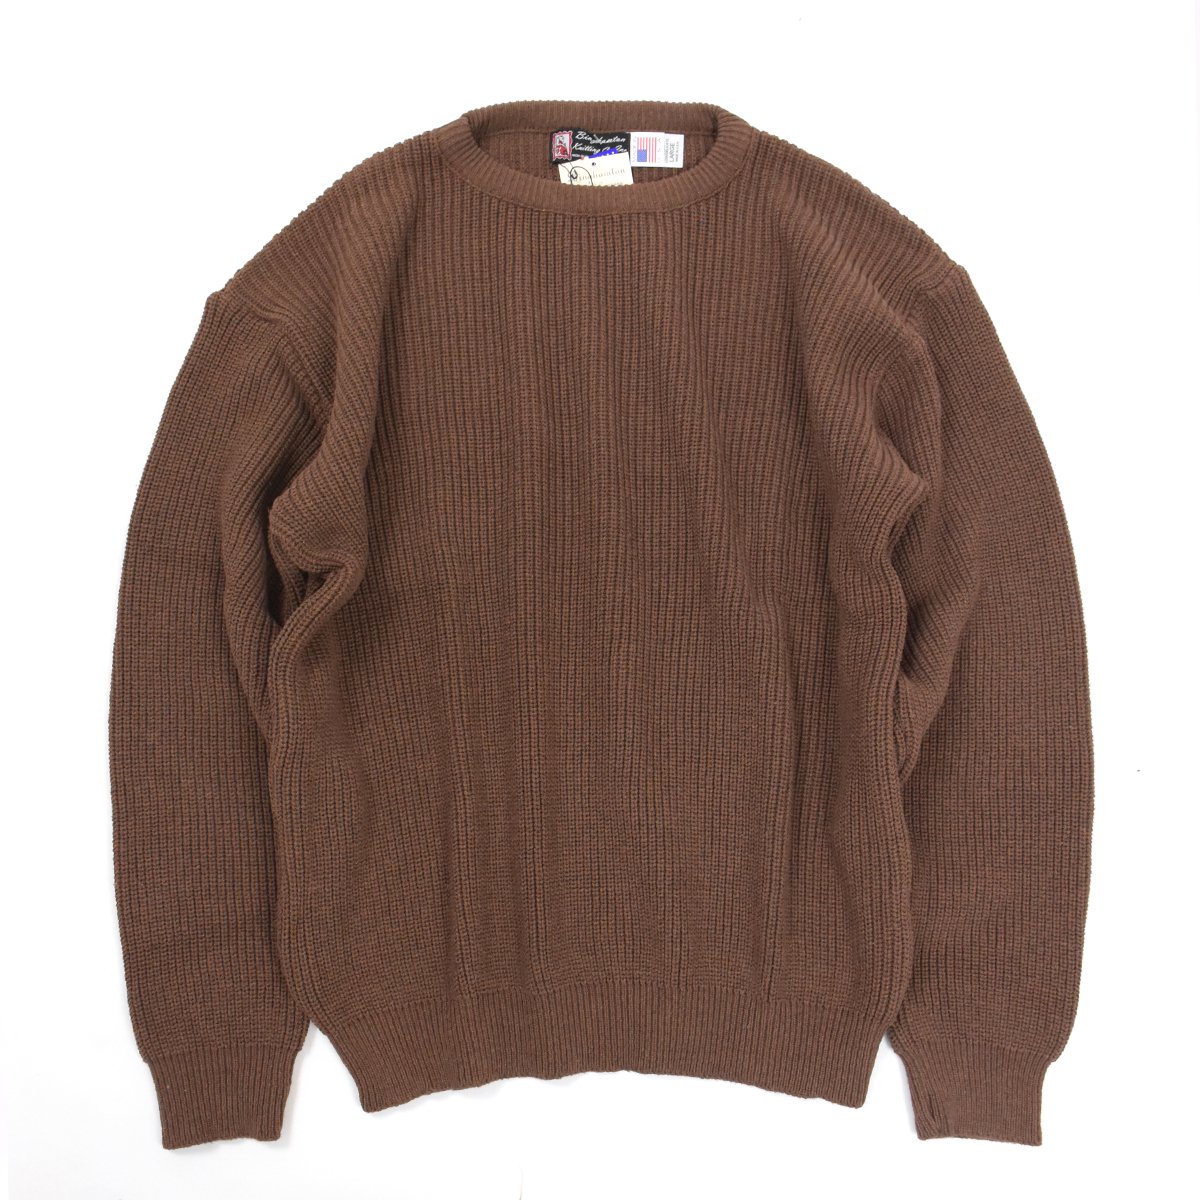 <img class='new_mark_img1' src='https://img.shop-pro.jp/img/new/icons23.gif' style='border:none;display:inline;margin:0px;padding:0px;width:auto;' />【Binghamton】Knitting Shaker Pullover (Brown)
                          </a>
            <span class=